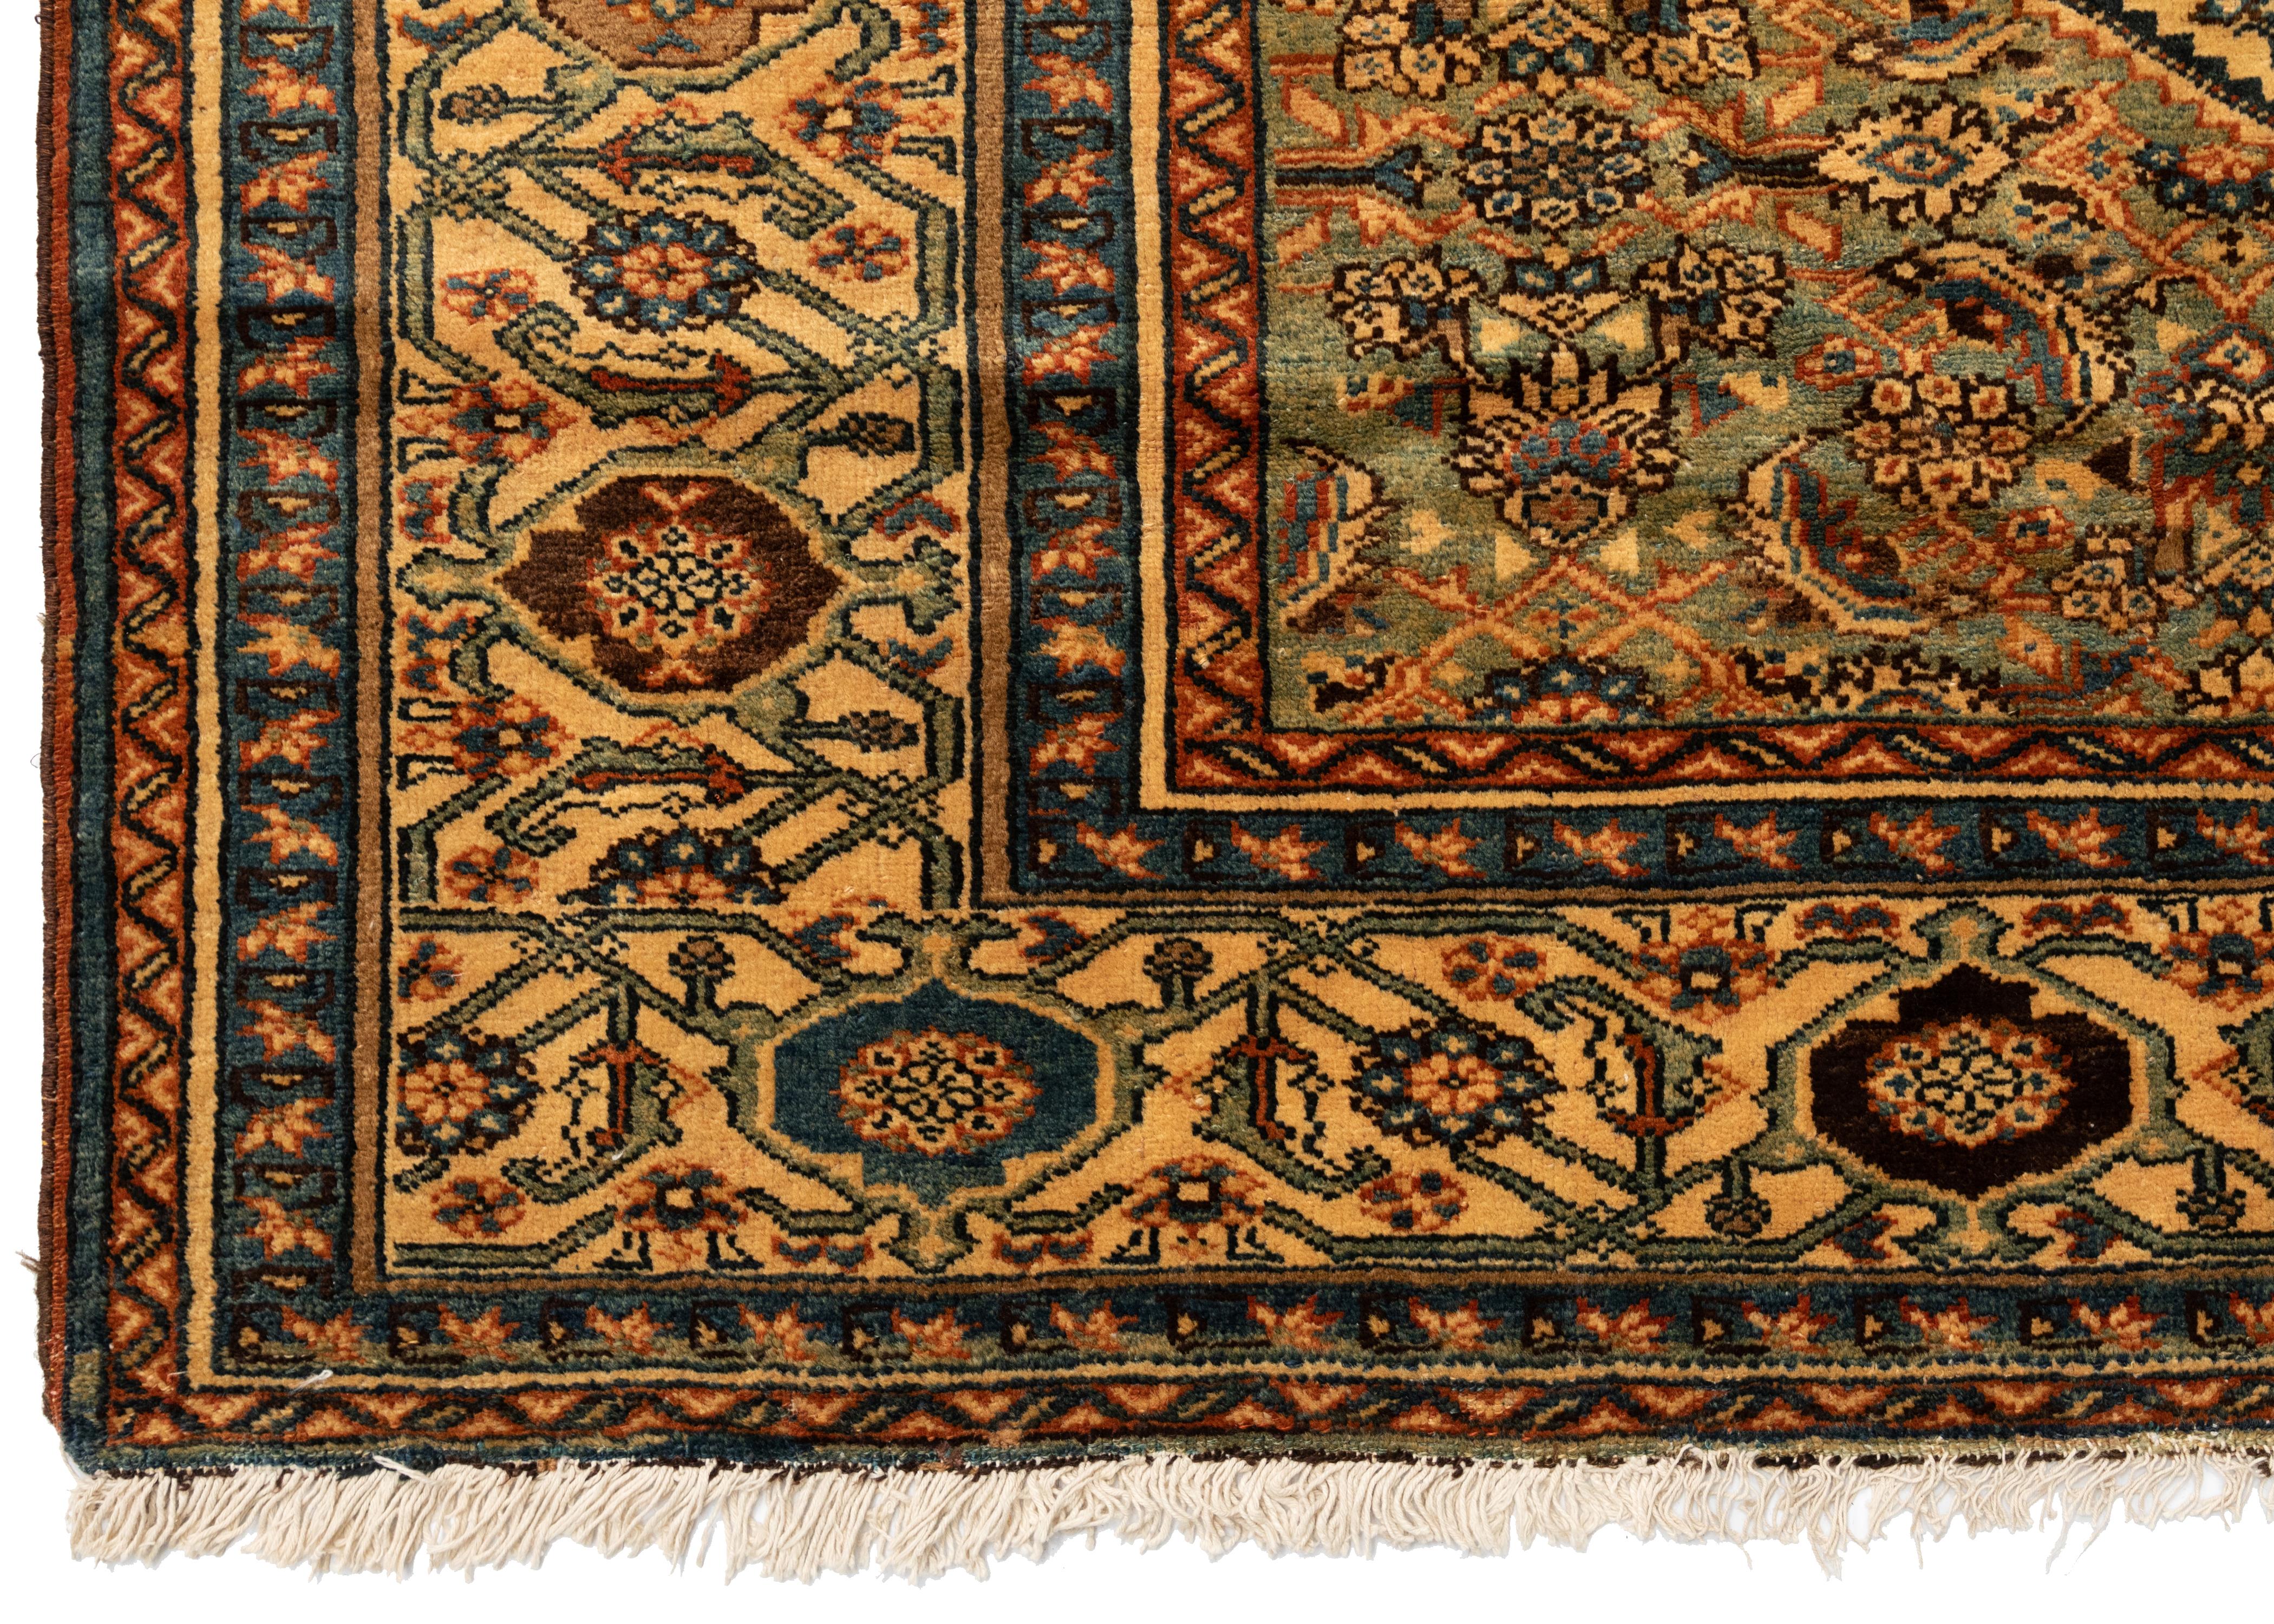 This is a fine example of an antique Malayer dating from the 1910-1920s measuring: 7.5 x 16.2 ft.

Antique Malayer rugs were woven in the small town of Malayer, located south of Hamedan on the road to Arak. The location in relation to these towns is